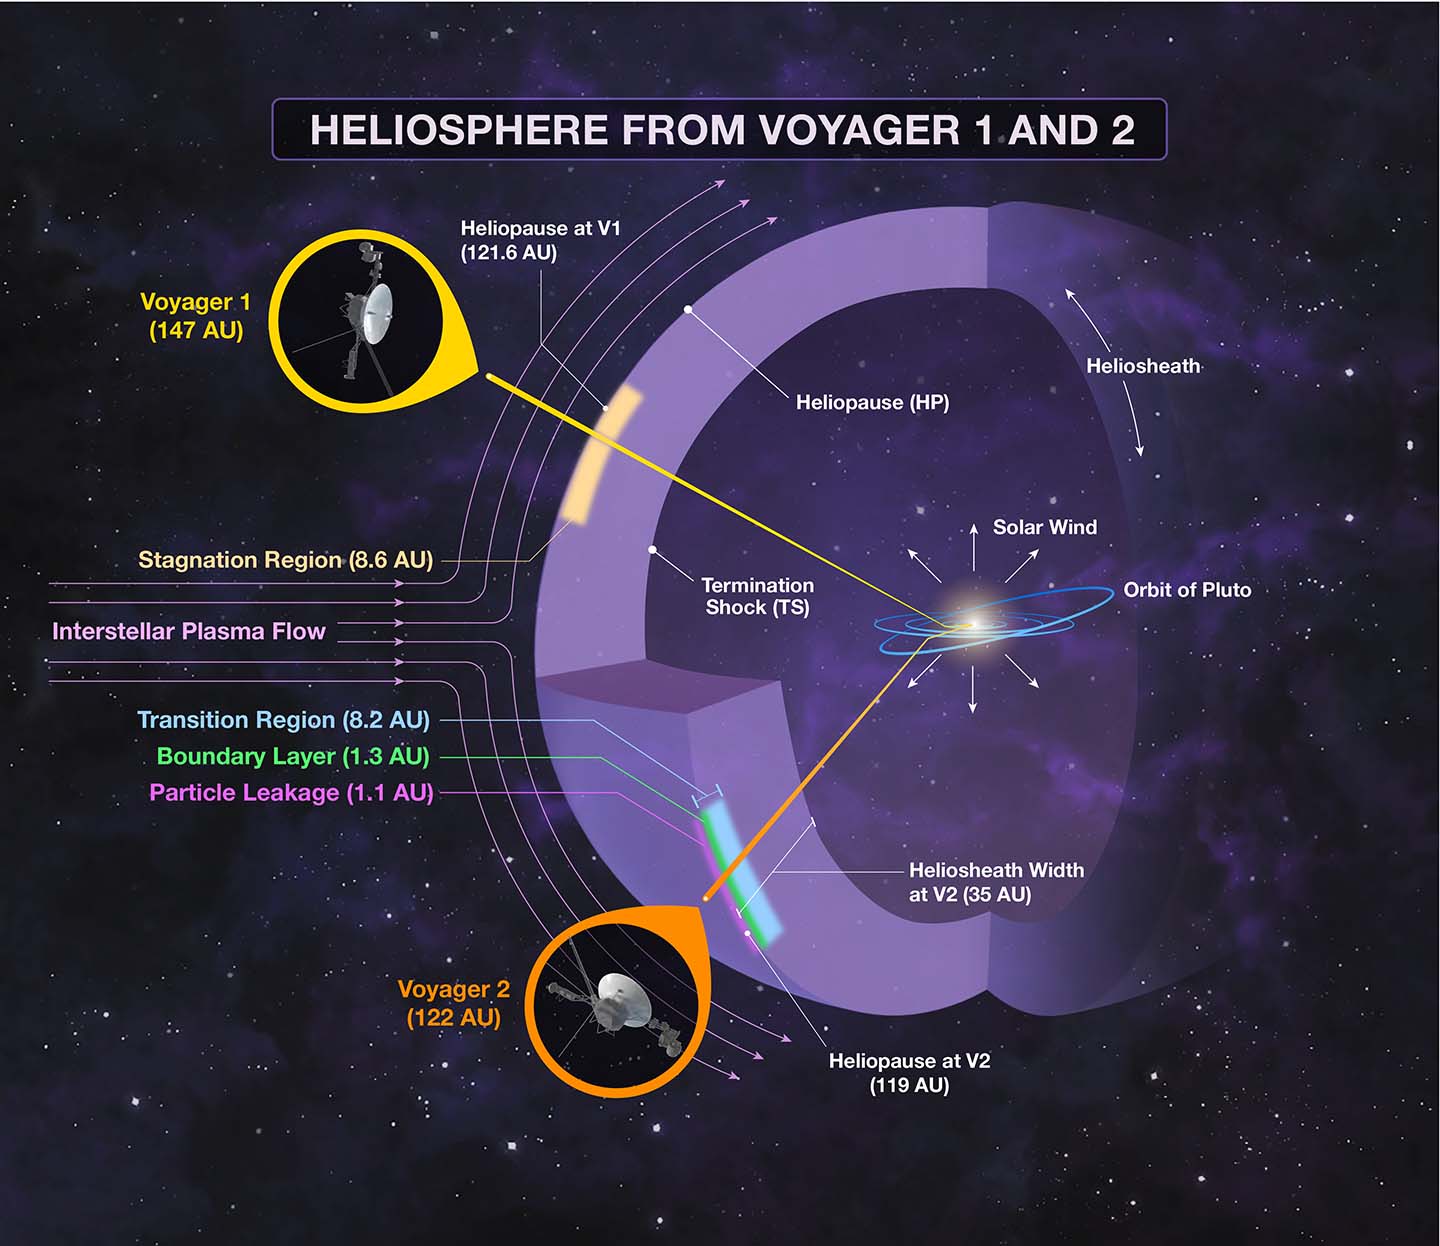 Schematic summary of the Voyager spacecraft’s findings in the region where the solar system meets the local interstellar medium